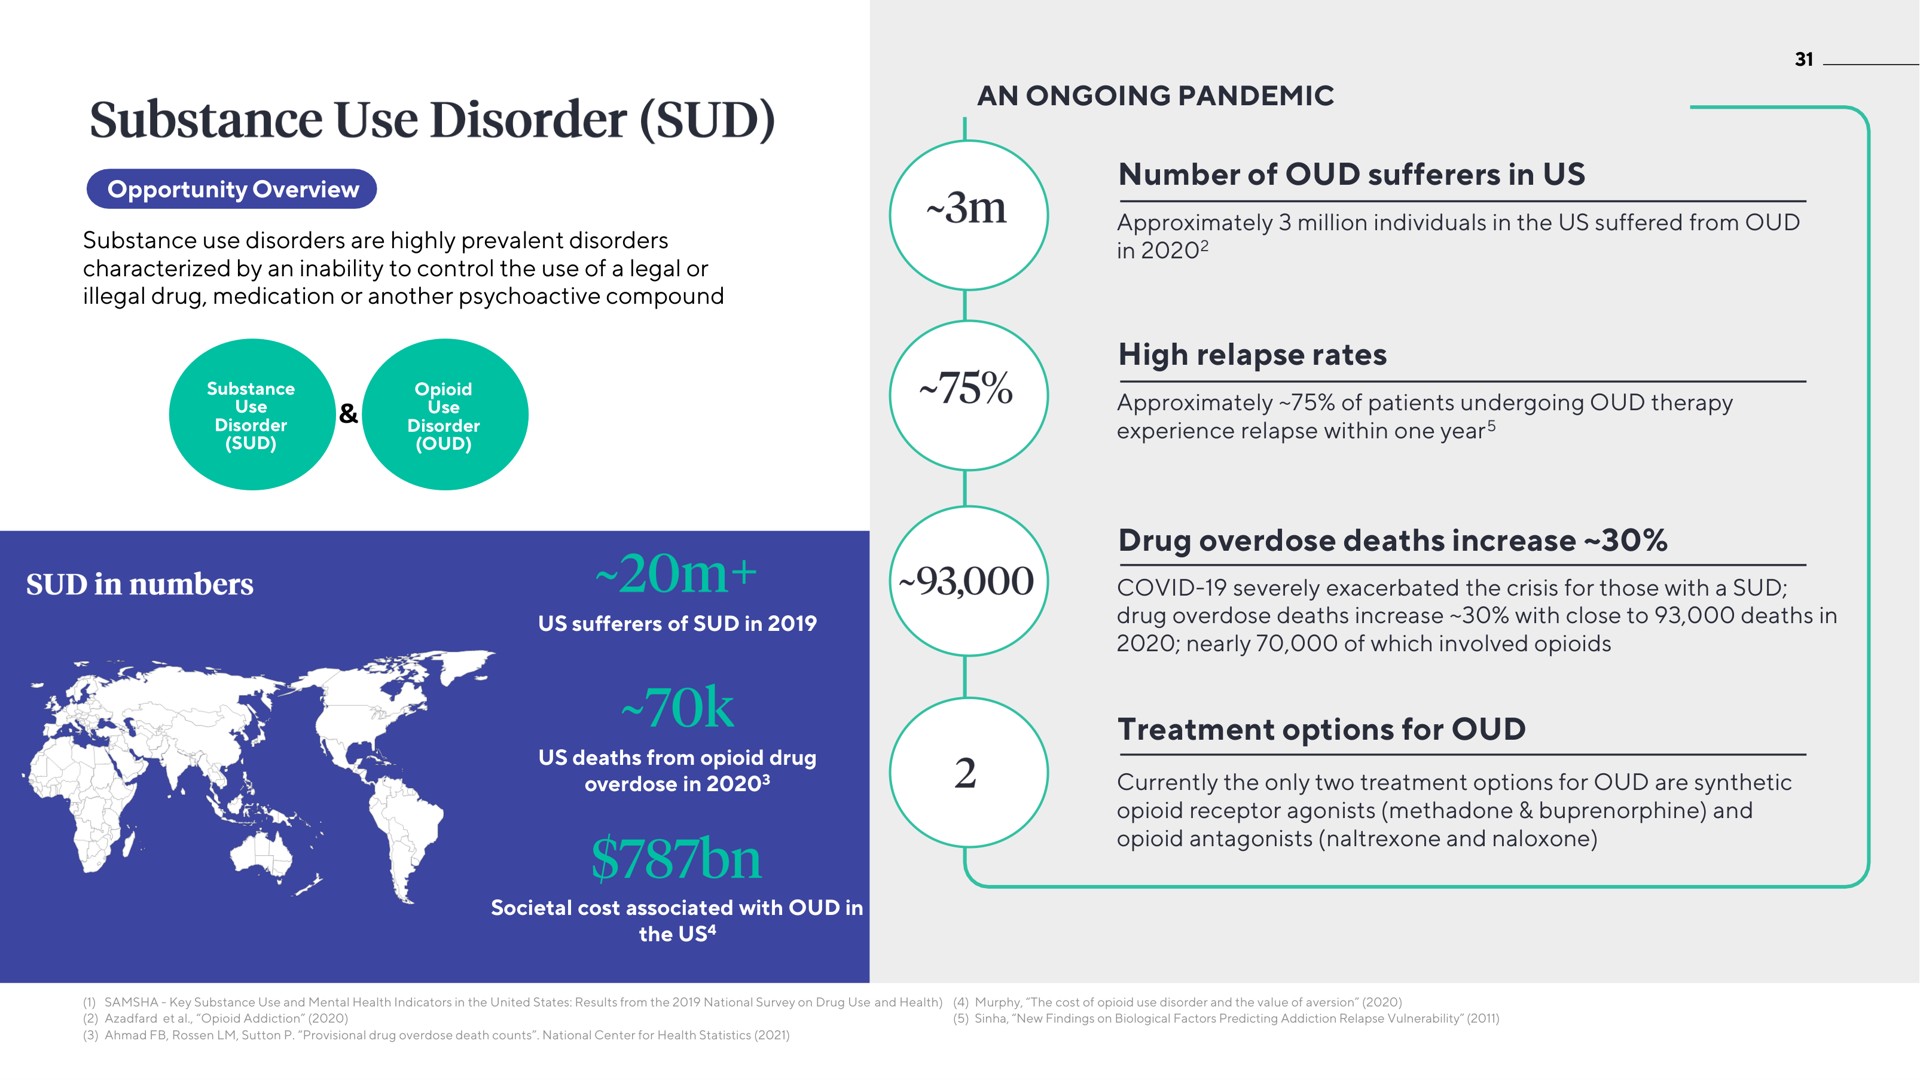 an ongoing pandemic number of sufferers in us high relapse rates drug overdose deaths increase treatment options for | ATAI